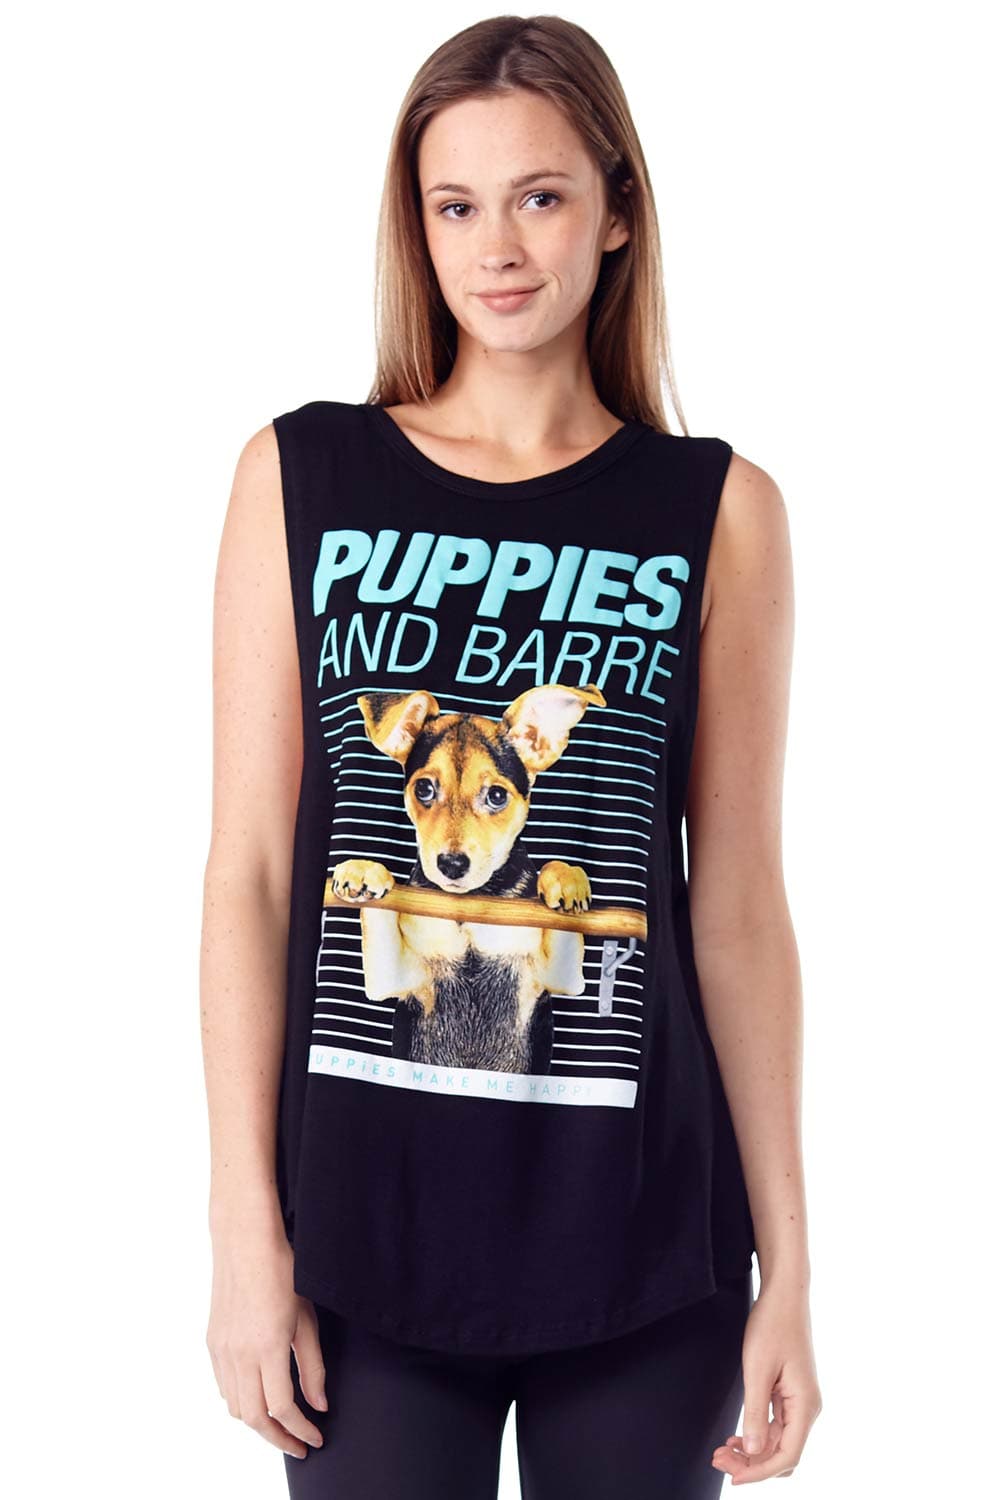 PUPPIES Puppies & Barre Sleeveless Tee - Evolve Fit Wear